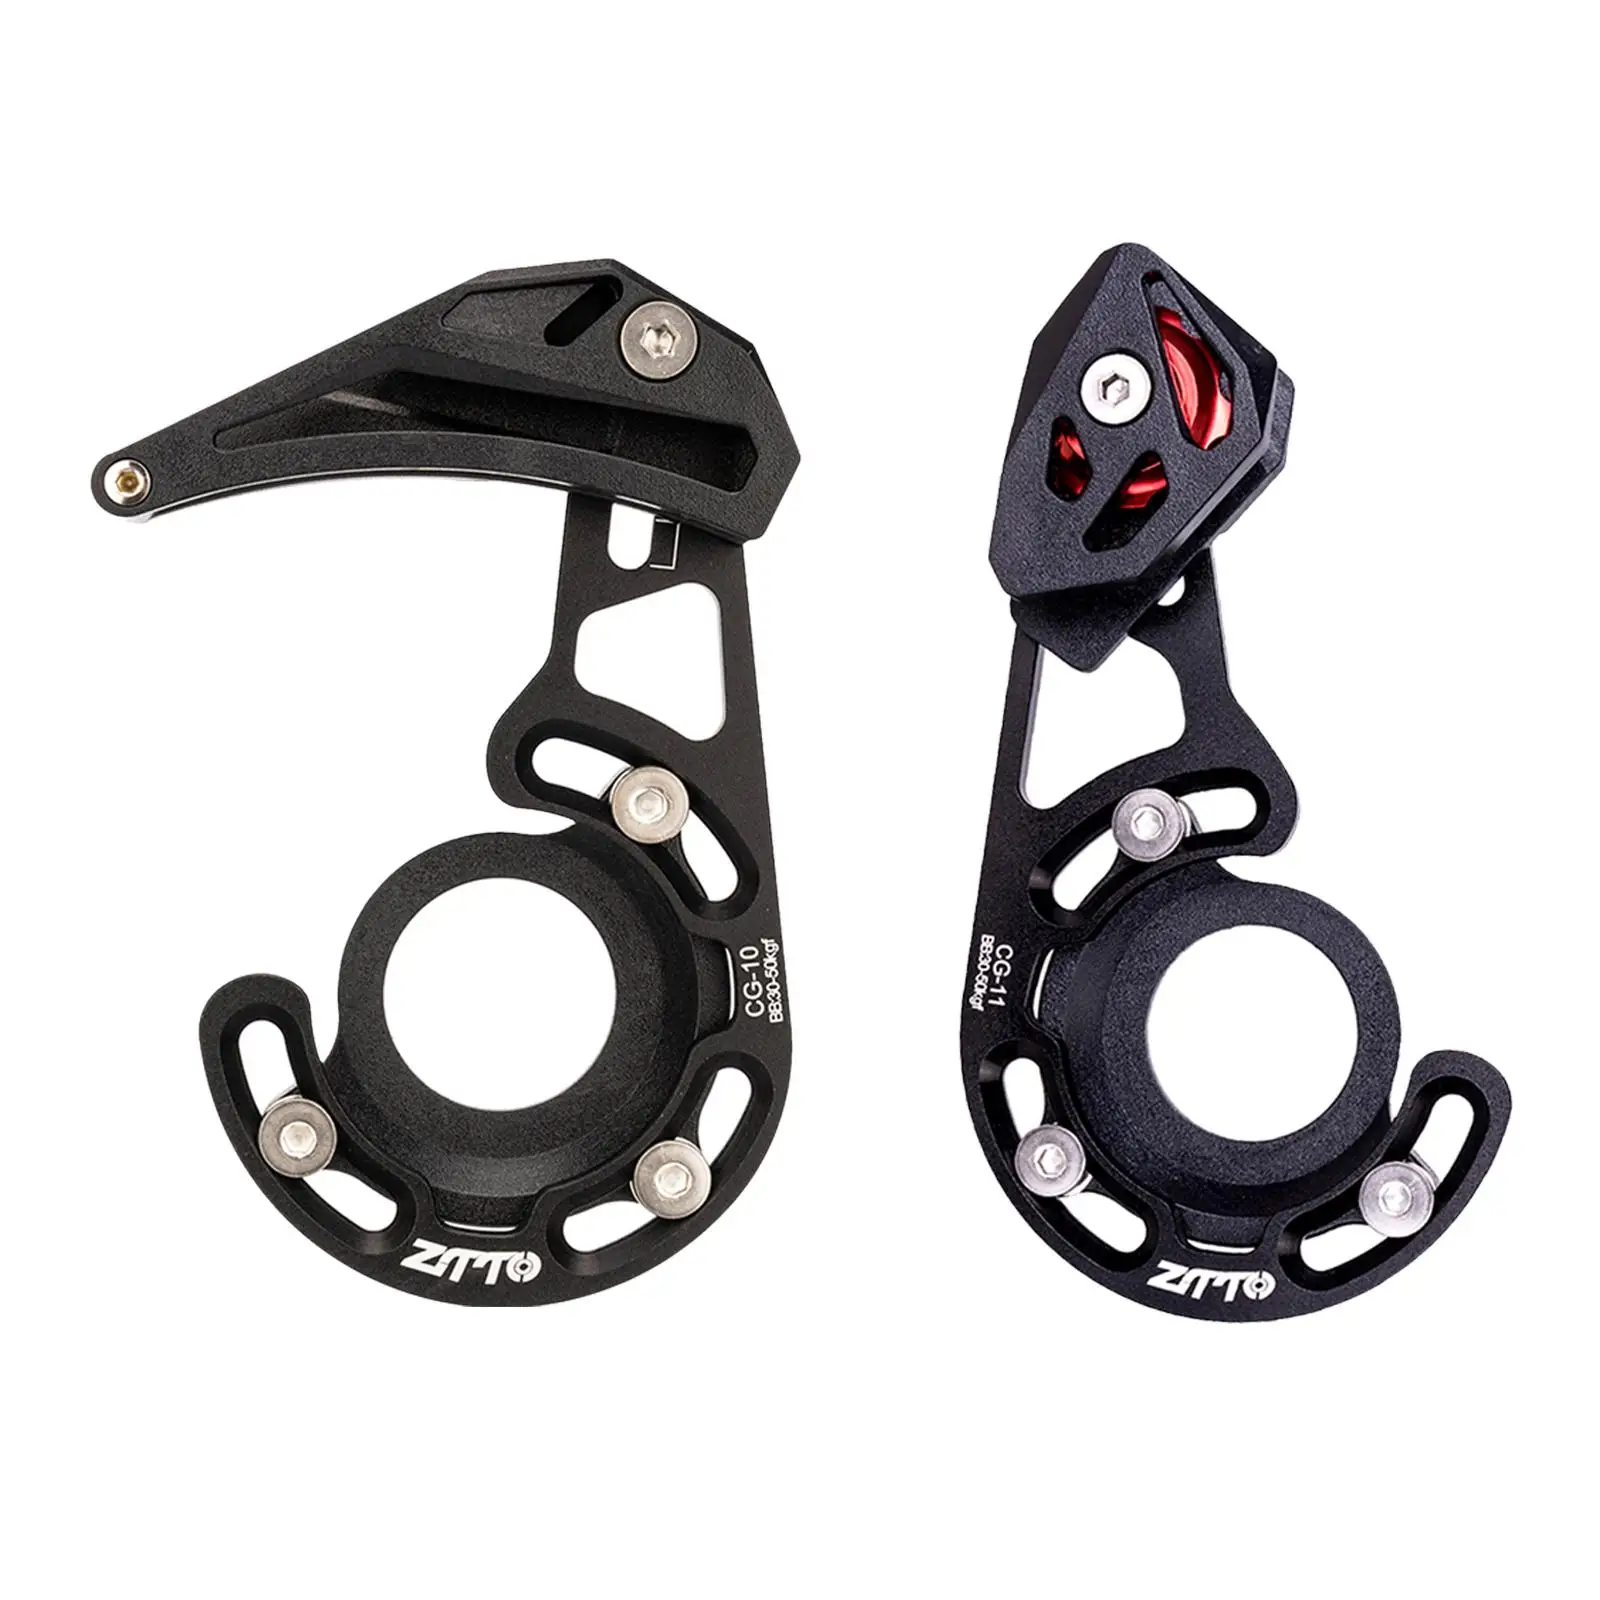 lovehousesky MTB Bike Chain Guider 28T-38T Iscg05 BB Mount 1x System Lightweight